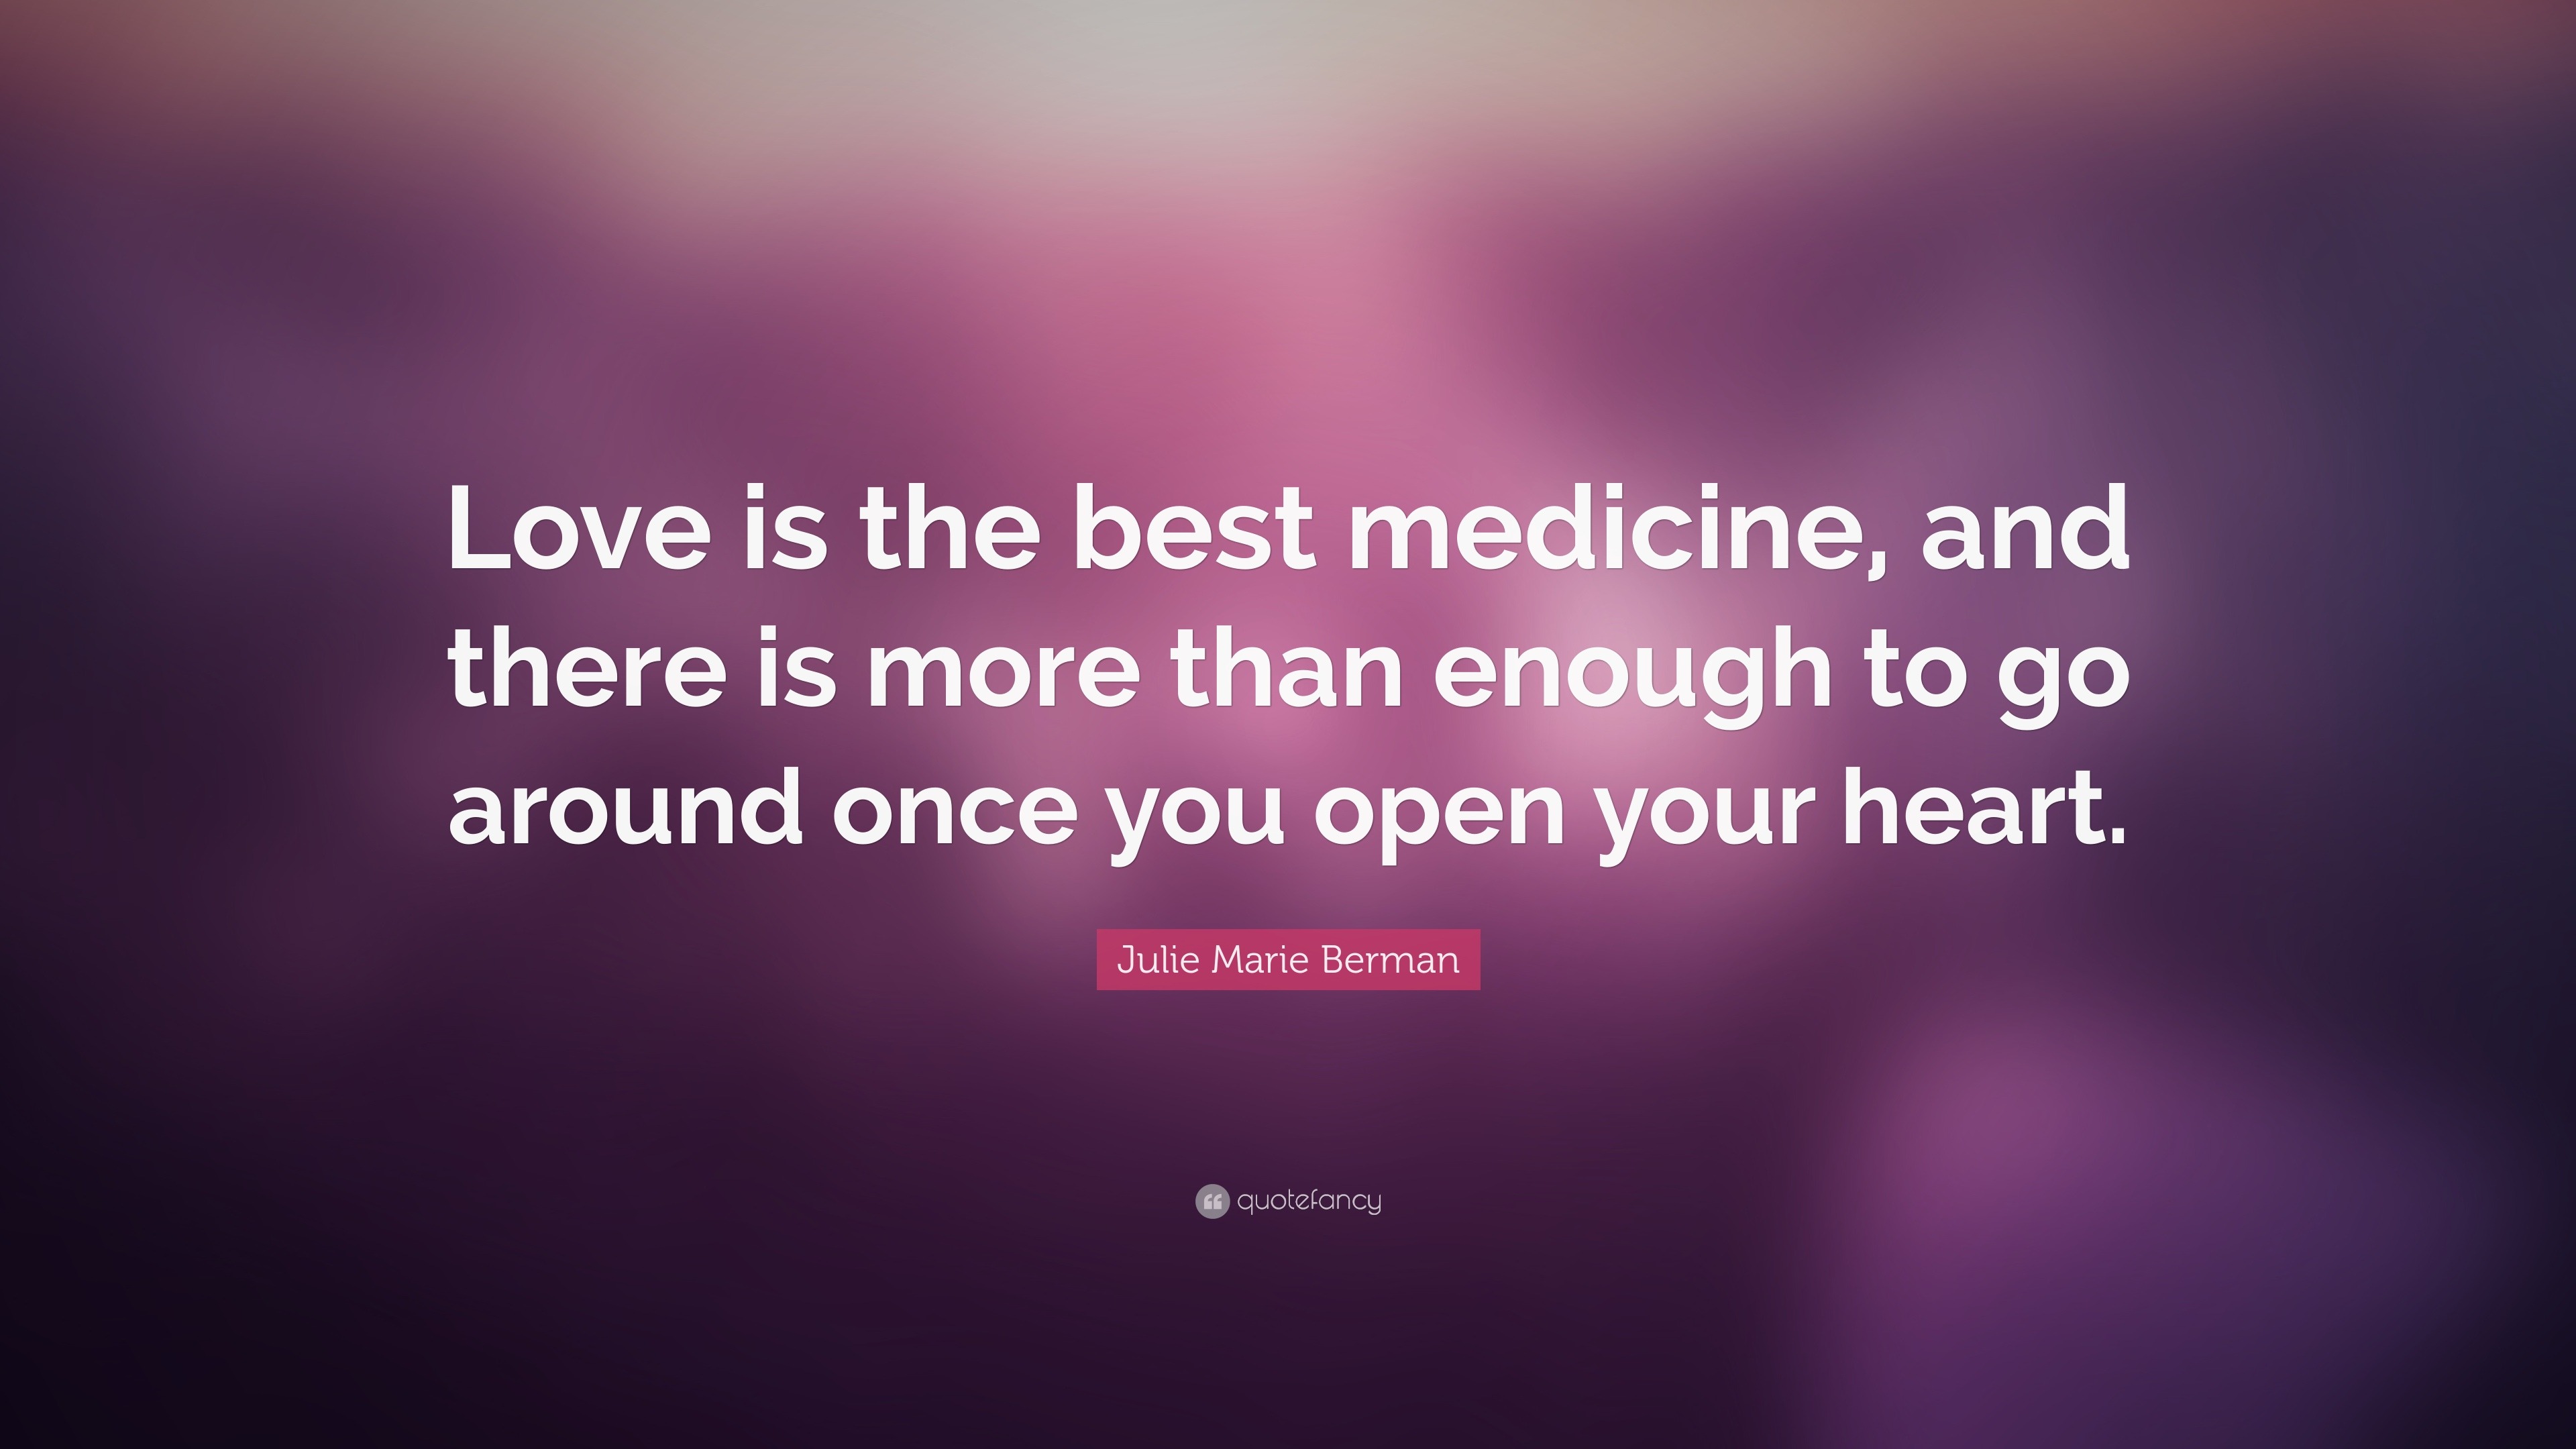 Julie Marie Berman Quote “Love is the best medicine and there is more